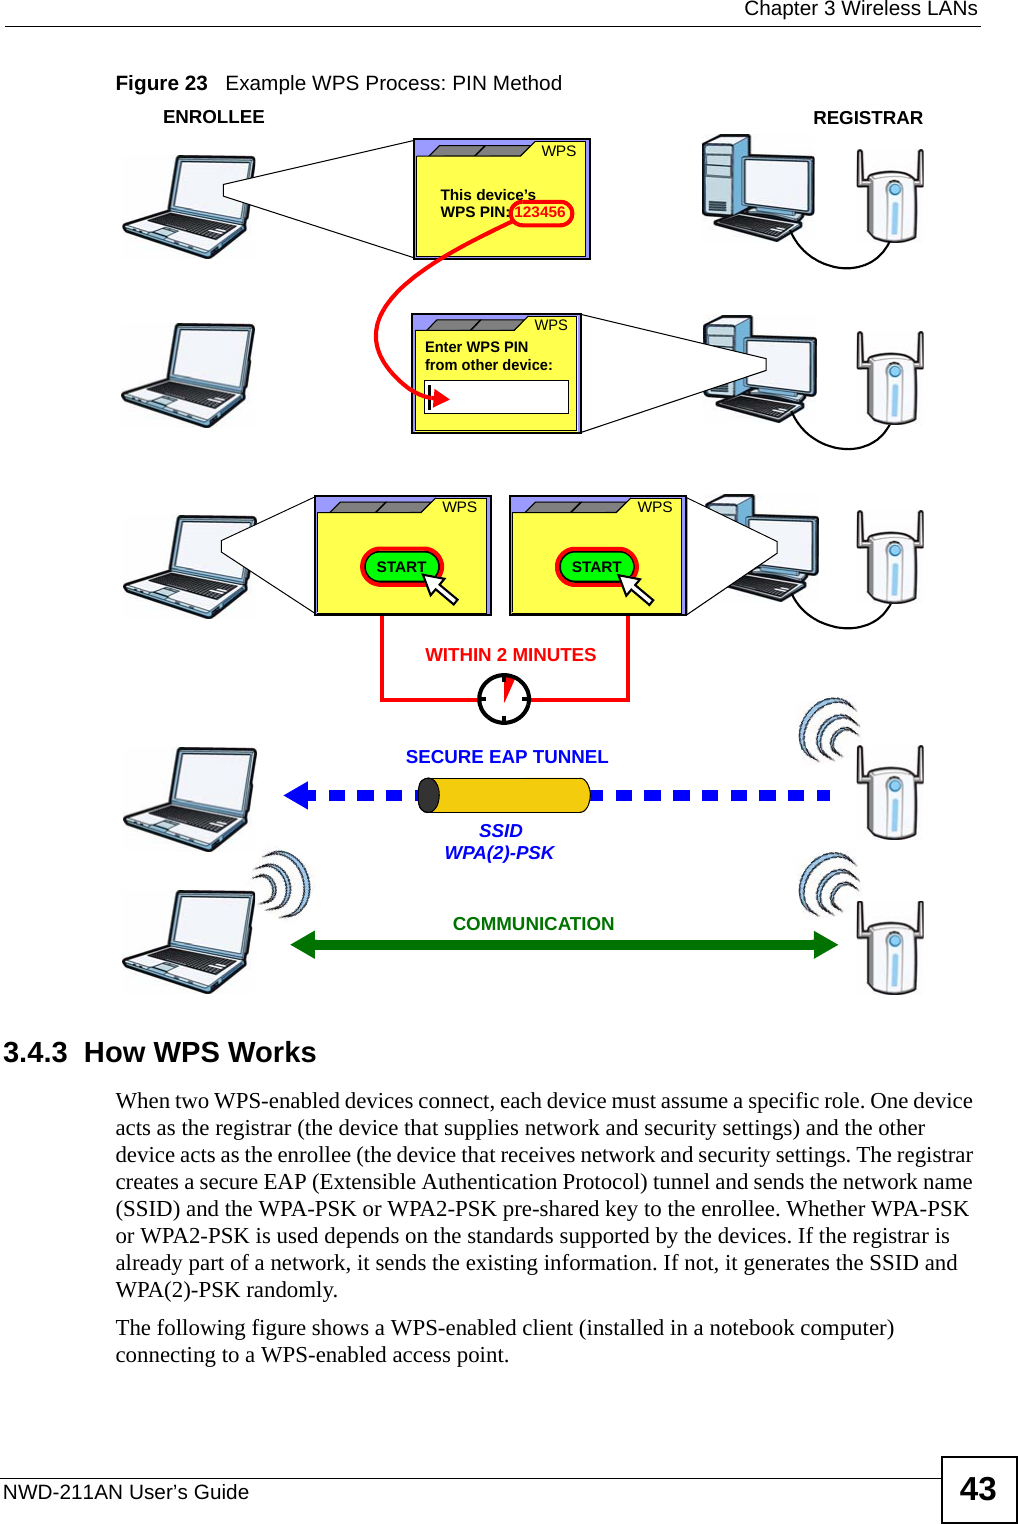  Chapter 3 Wireless LANsNWD-211AN User’s Guide 43Figure 23   Example WPS Process: PIN Method3.4.3  How WPS WorksWhen two WPS-enabled devices connect, each device must assume a specific role. One device acts as the registrar (the device that supplies network and security settings) and the other device acts as the enrollee (the device that receives network and security settings. The registrar creates a secure EAP (Extensible Authentication Protocol) tunnel and sends the network name (SSID) and the WPA-PSK or WPA2-PSK pre-shared key to the enrollee. Whether WPA-PSK or WPA2-PSK is used depends on the standards supported by the devices. If the registrar is already part of a network, it sends the existing information. If not, it generates the SSID and WPA(2)-PSK randomly.The following figure shows a WPS-enabled client (installed in a notebook computer) connecting to a WPS-enabled access point.ENROLLEESECURE EAP TUNNELSSIDWPA(2)-PSKWITHIN 2 MINUTESCOMMUNICATIONThis device’s WPSEnter WPS PIN  WPSfrom other device: WPS PIN: 123456WPSSTARTWPSSTARTREGISTRAR